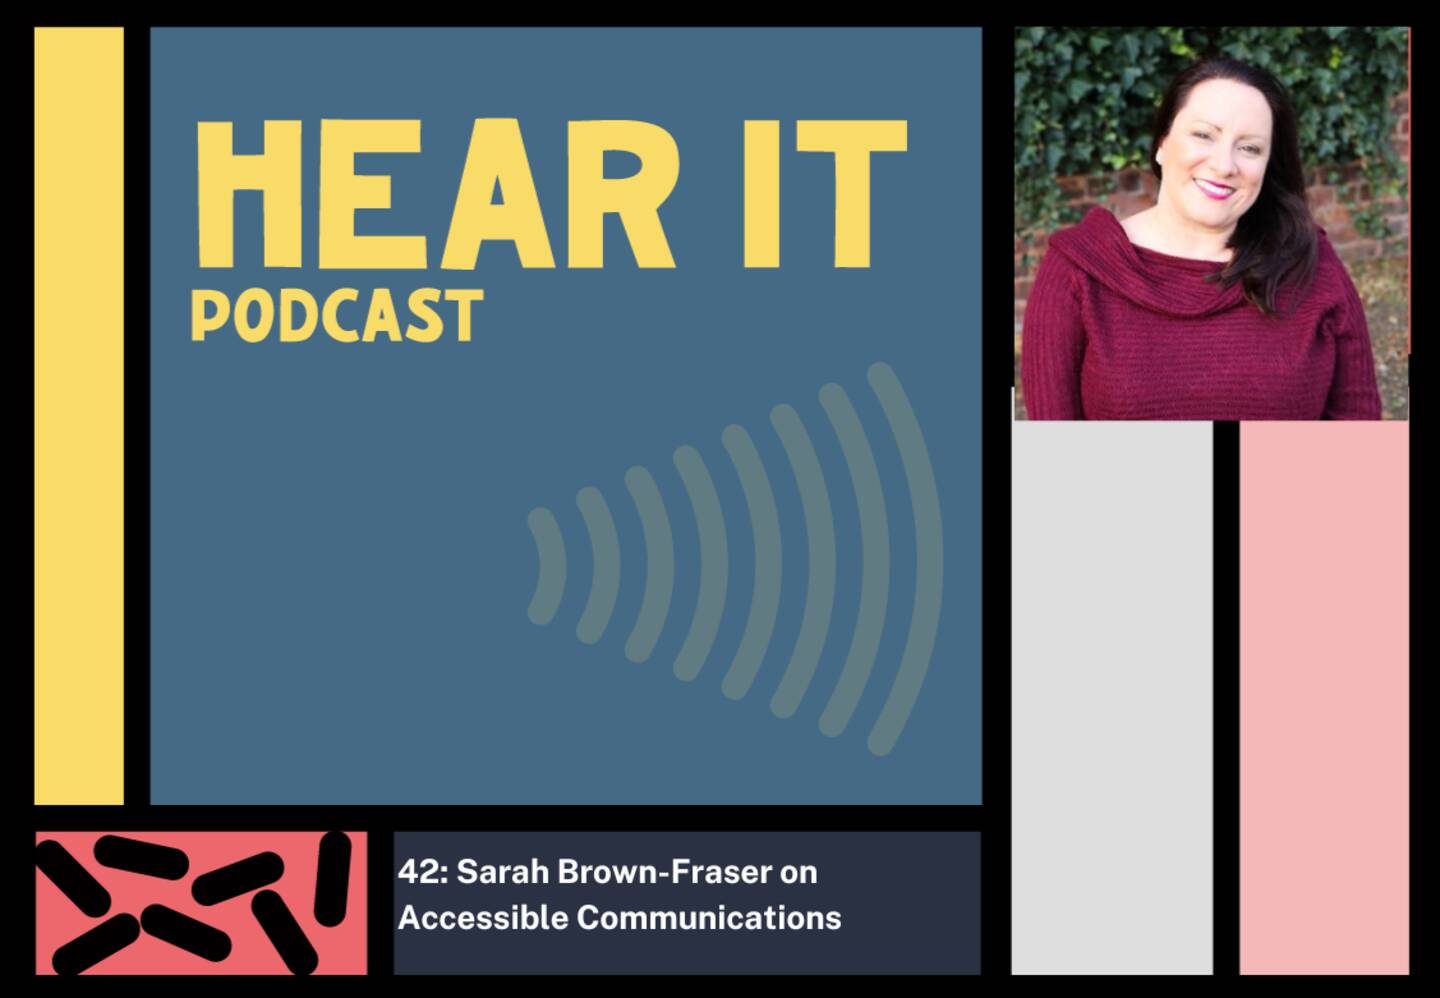 A cropped version of the cover plate of the Hear It podcast featuring a photograph Sarah Brown-Fraser